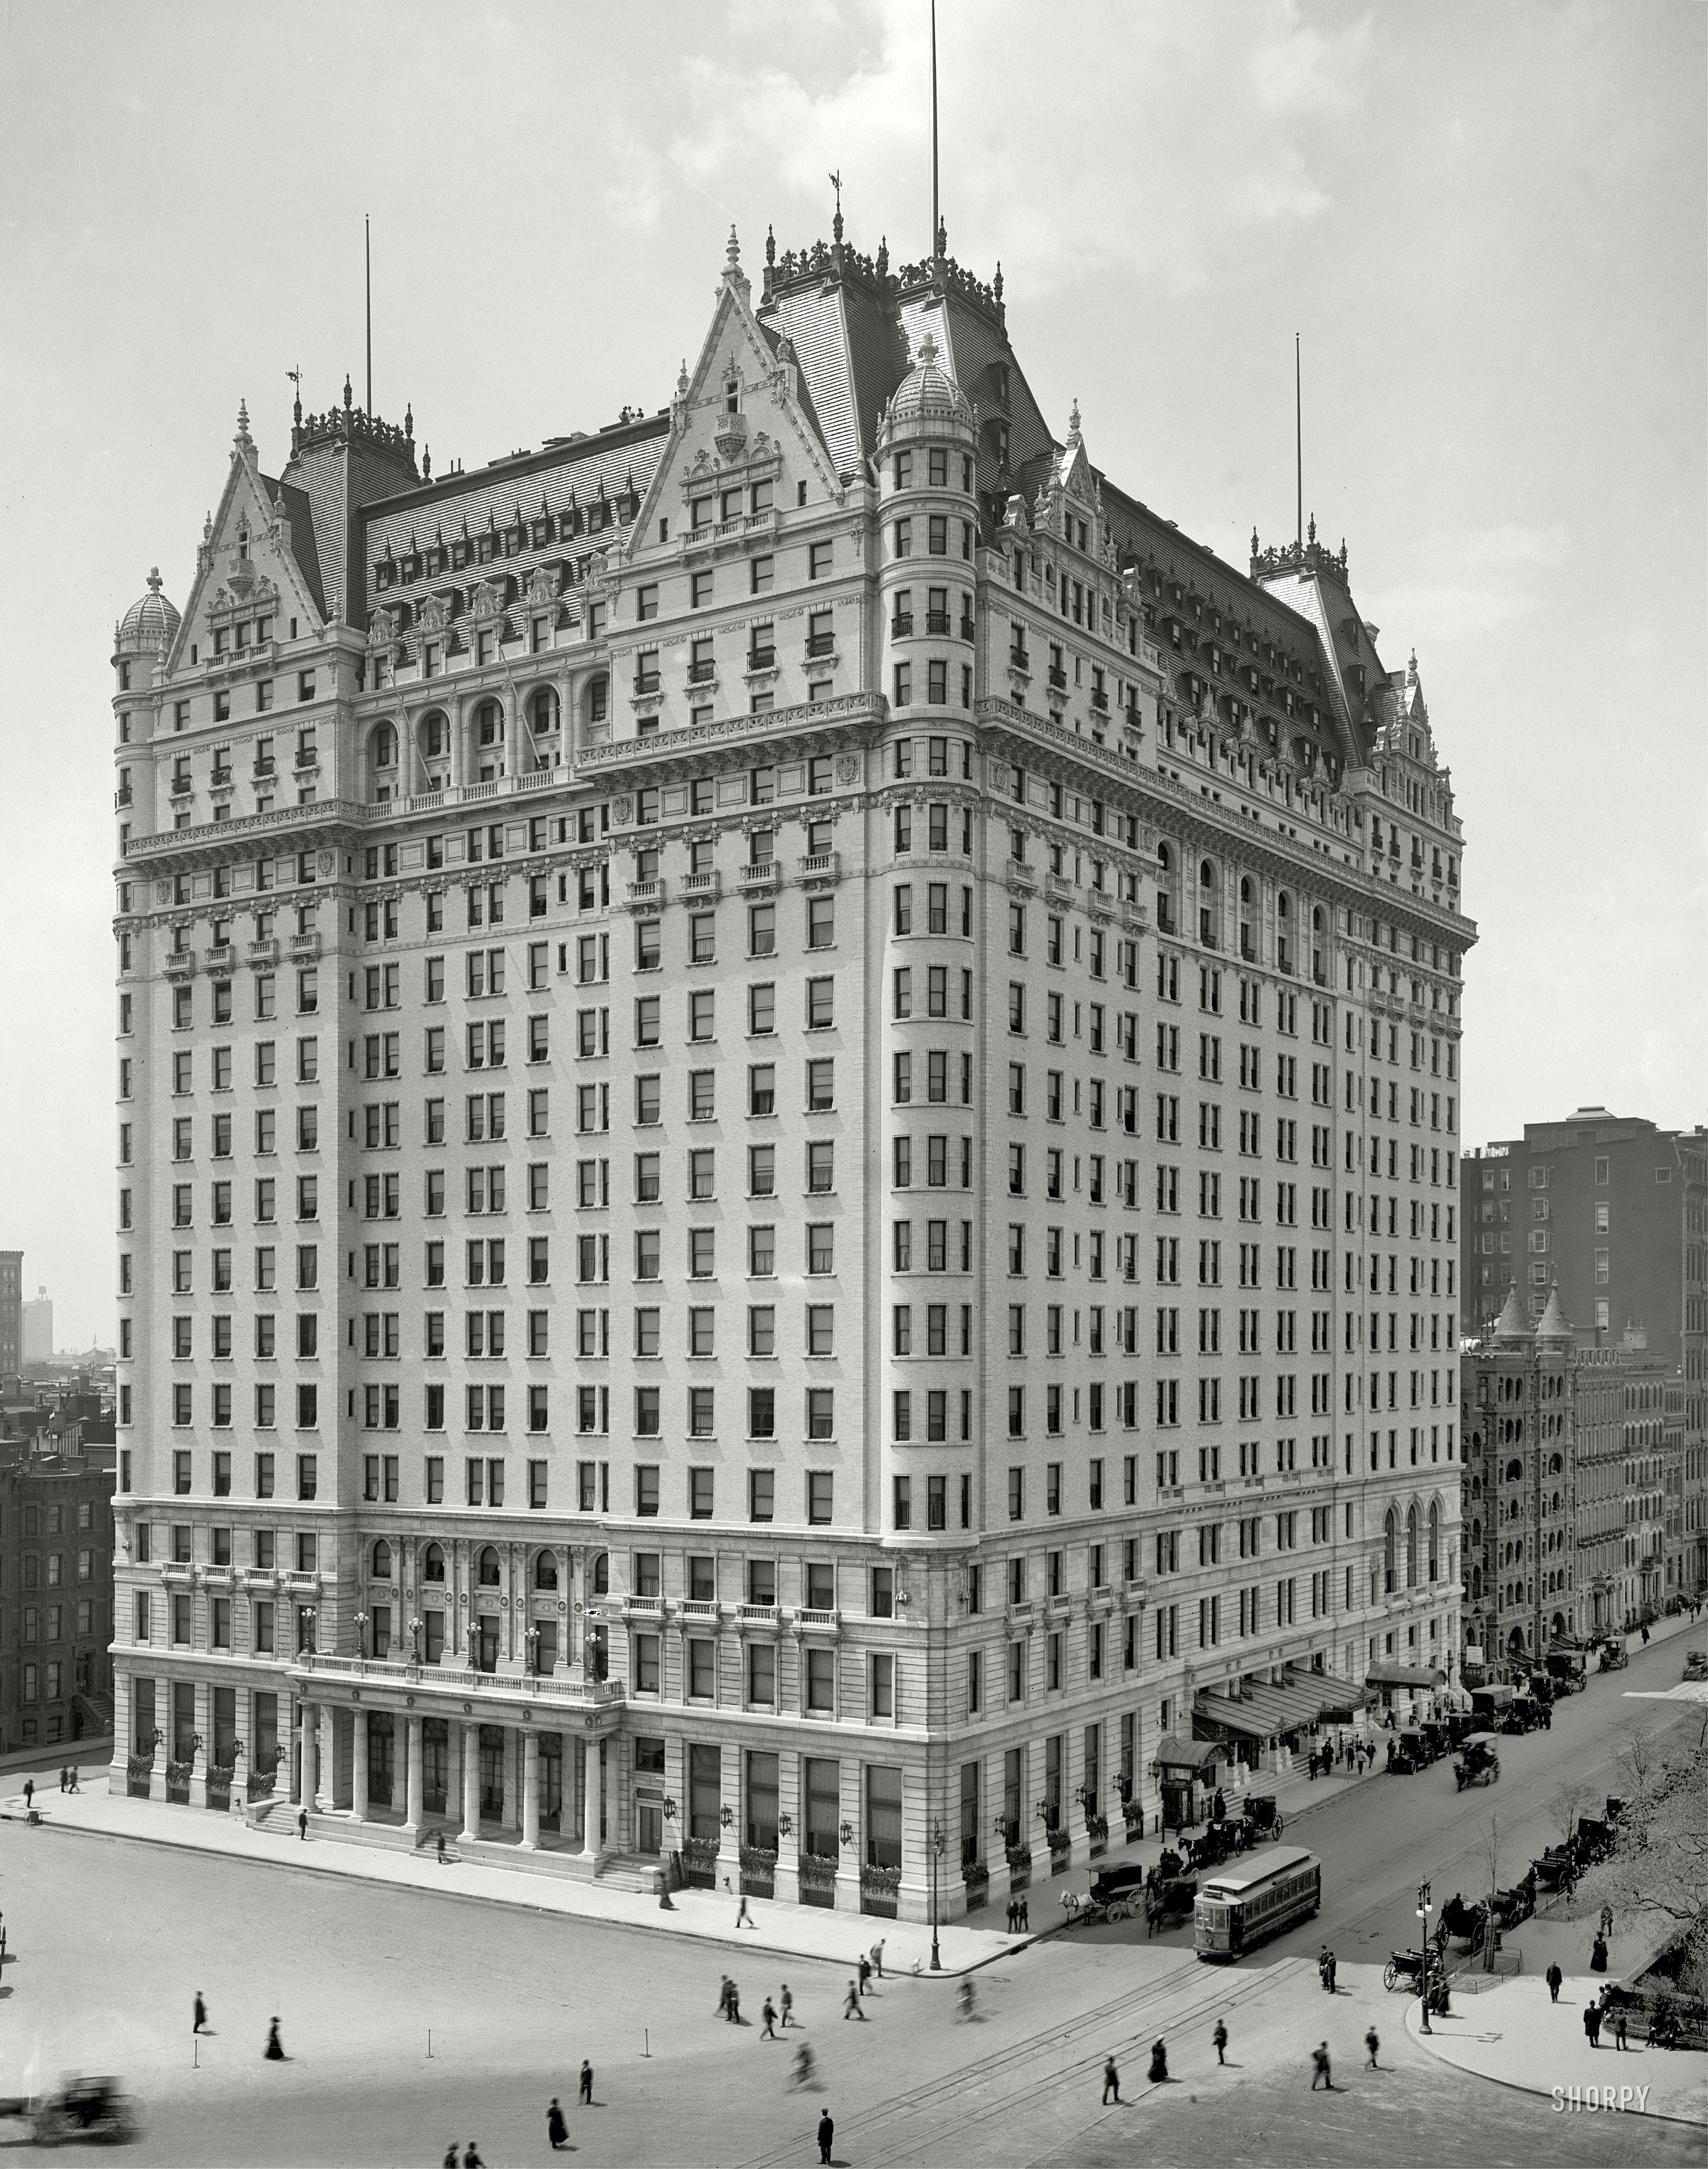 New York circa 1910. "Plaza Hotel." Yet another view of this aristocratic edifice. 8x10 inch dry plate glass negative, Detroit Publishing Company. View full size.